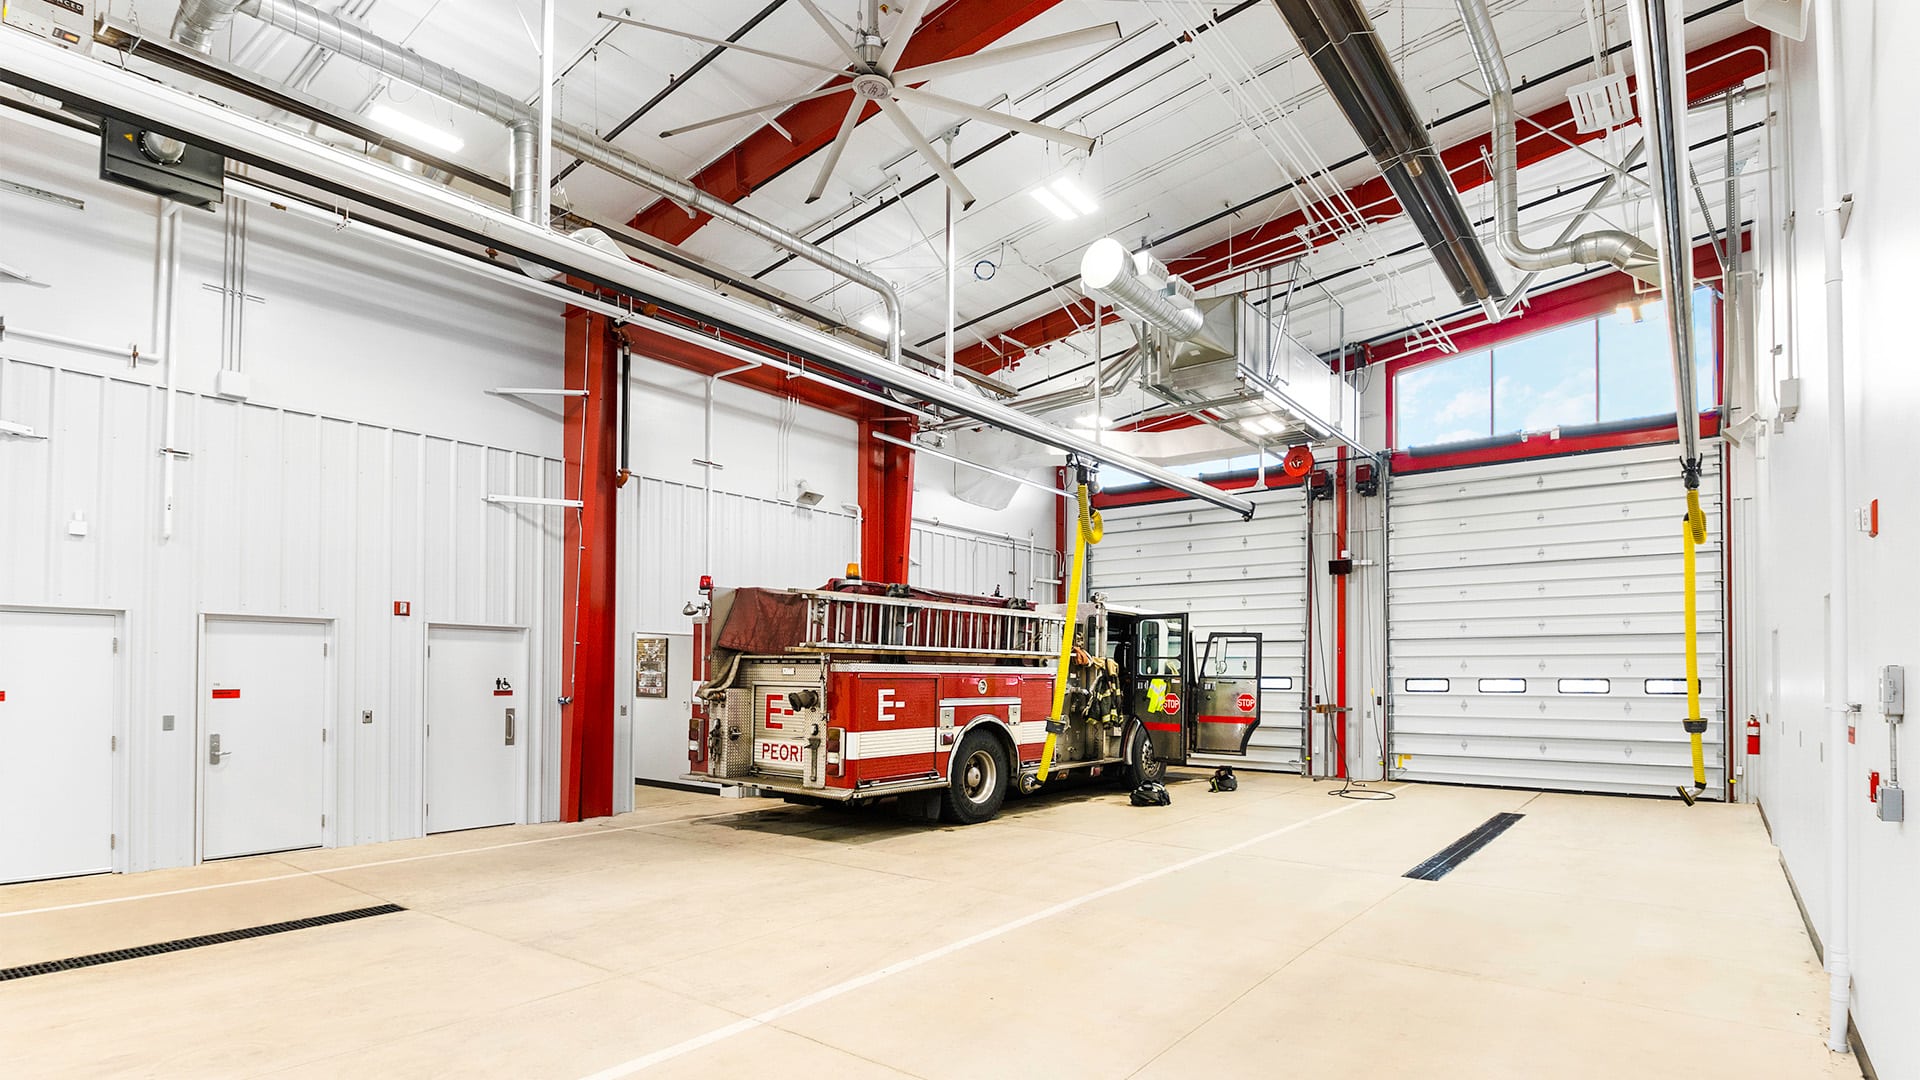 City of Peoria Fire Station #4